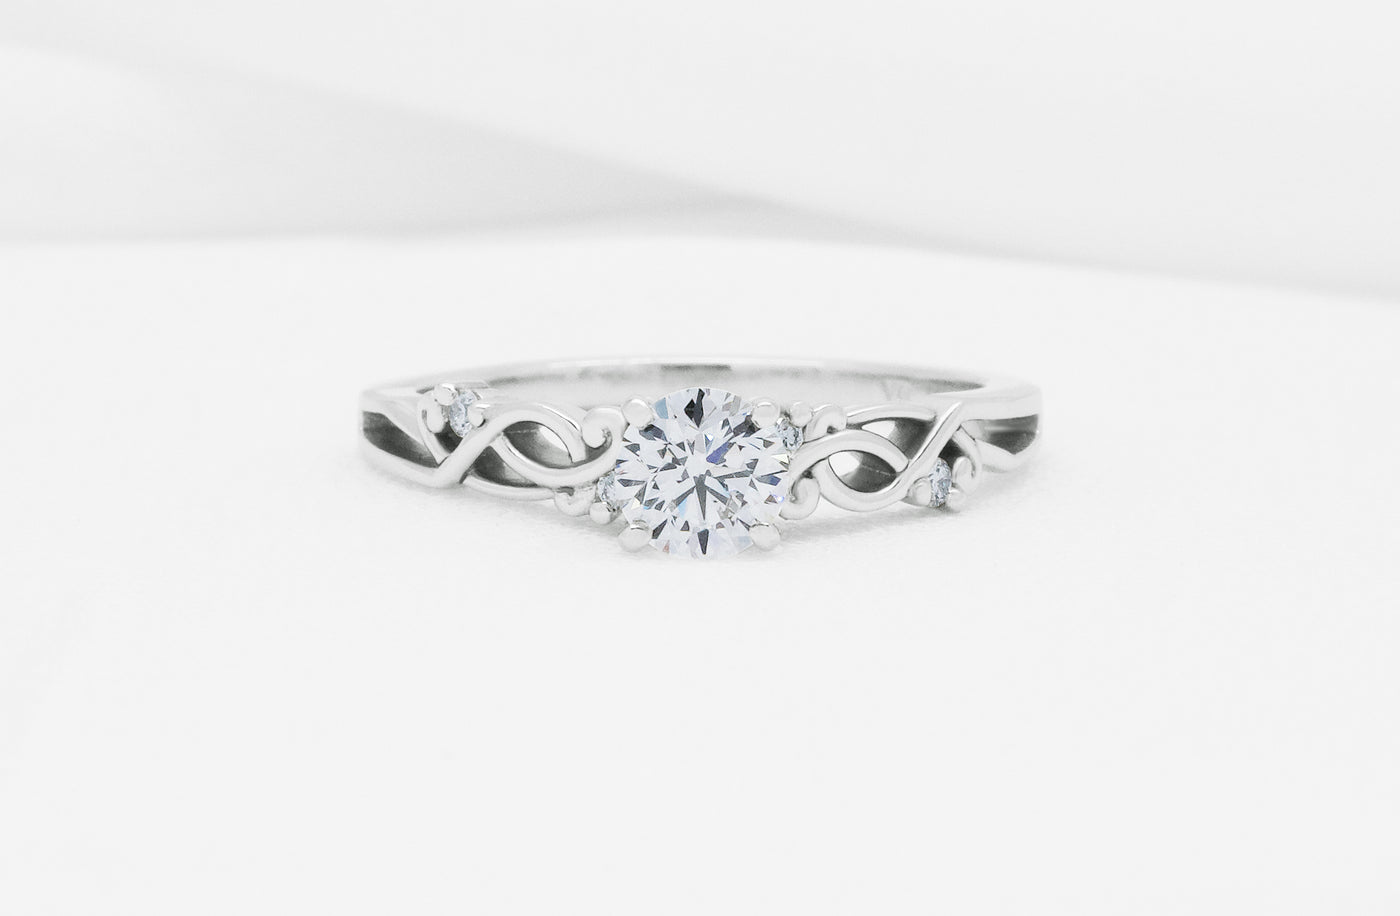 Narrative Collection, Maori, Polynesian, Celtic, diamond engagement ring, ring design, specialist, jewelry, jewellery, diamond, carat, carats, engagement ring, solitaire engagement ring, round cut, brilliant cut, diamond band, 18k, 18ct white gold, platinum, platinum setting, Traces , ready to ship, ready to go, 0.50ct, G, D colour, color, SI1 clarity